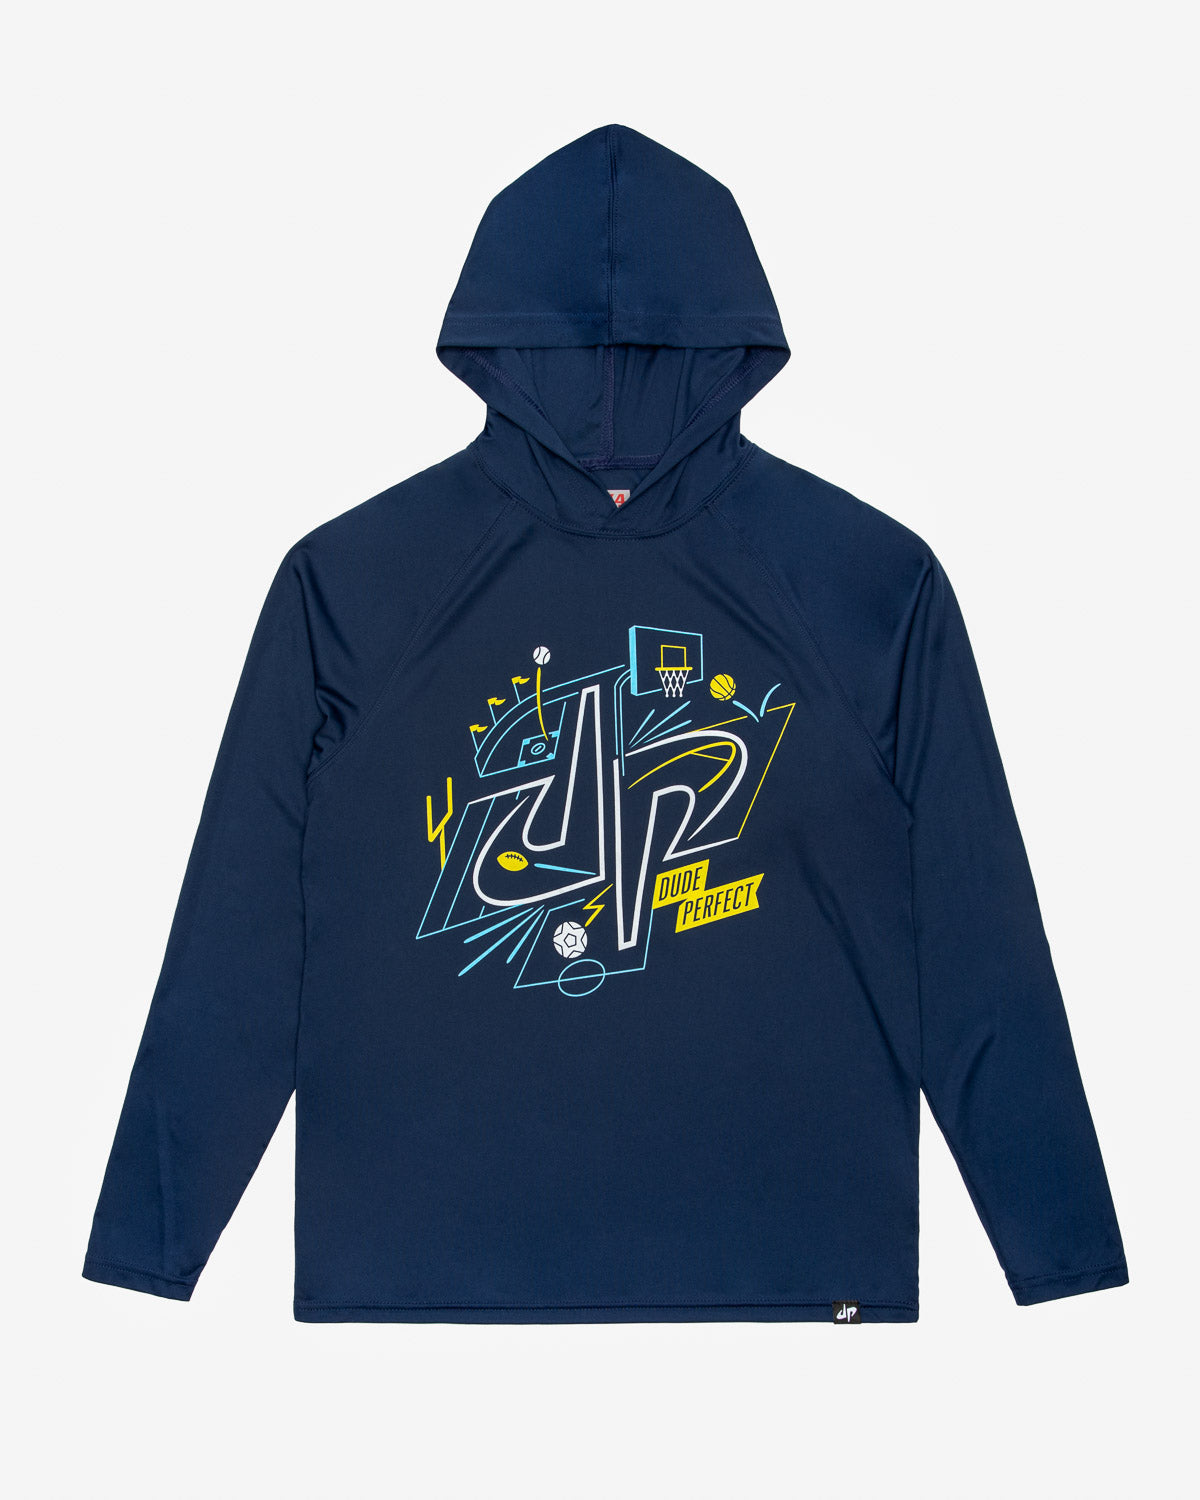 Courts and Sports Lightweight Performance Hoodie (Navy)